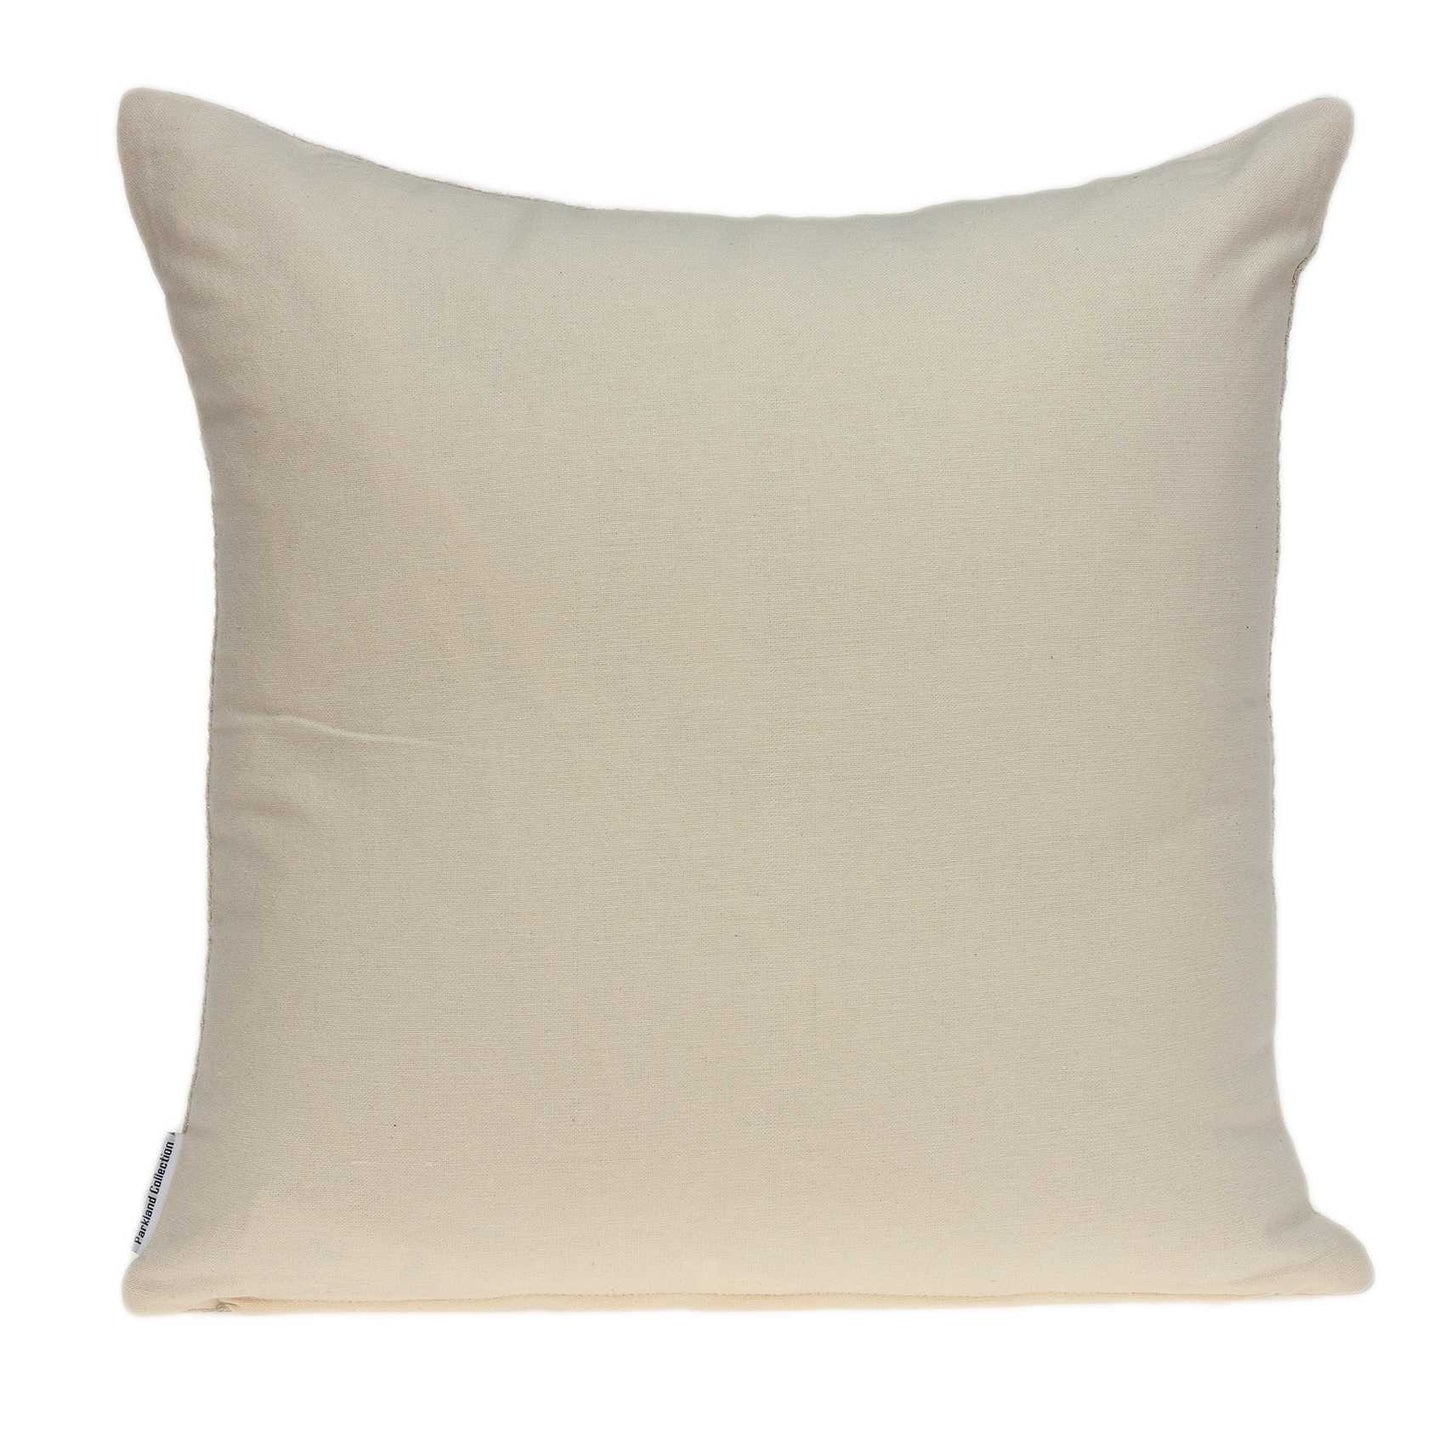 20" X 6" X 14" Transitional Beige Pillow Cover With Poly Insert